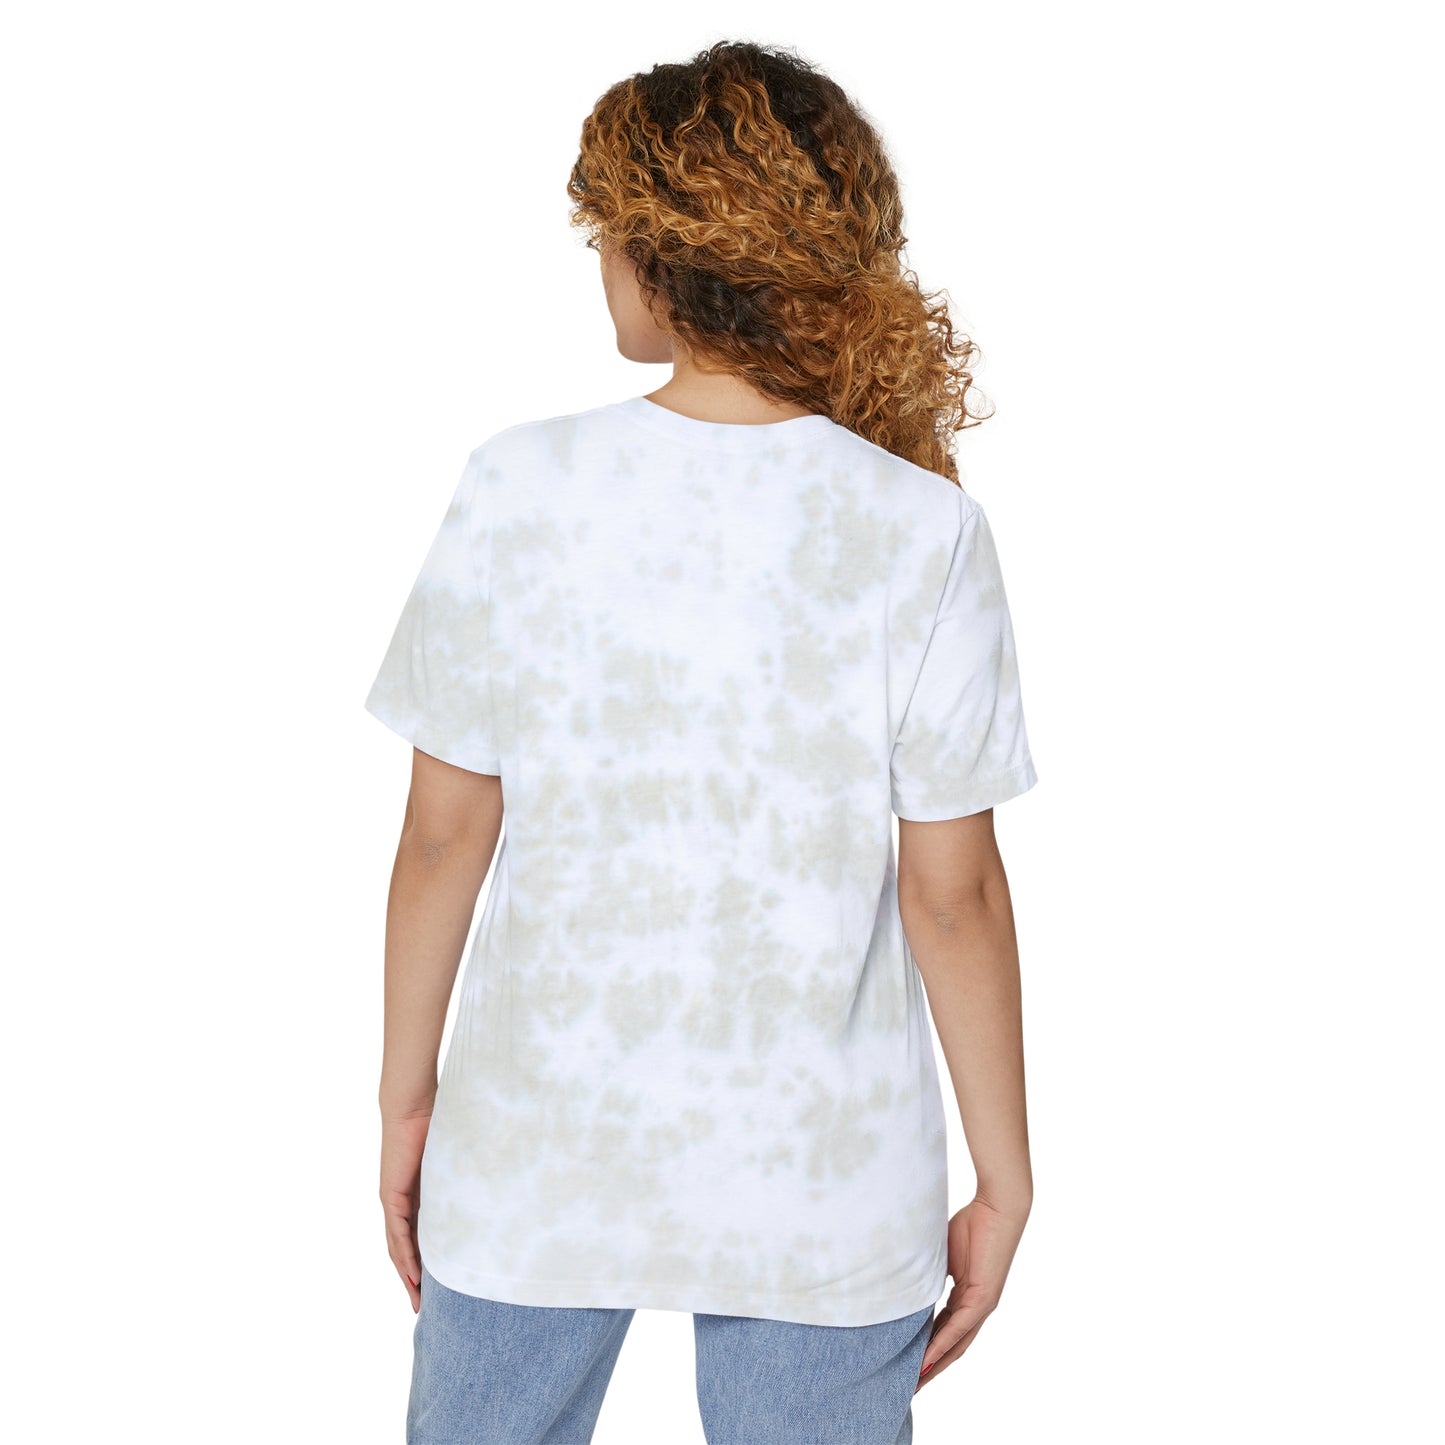 The Cana House Tie-Dyed T-Shirt